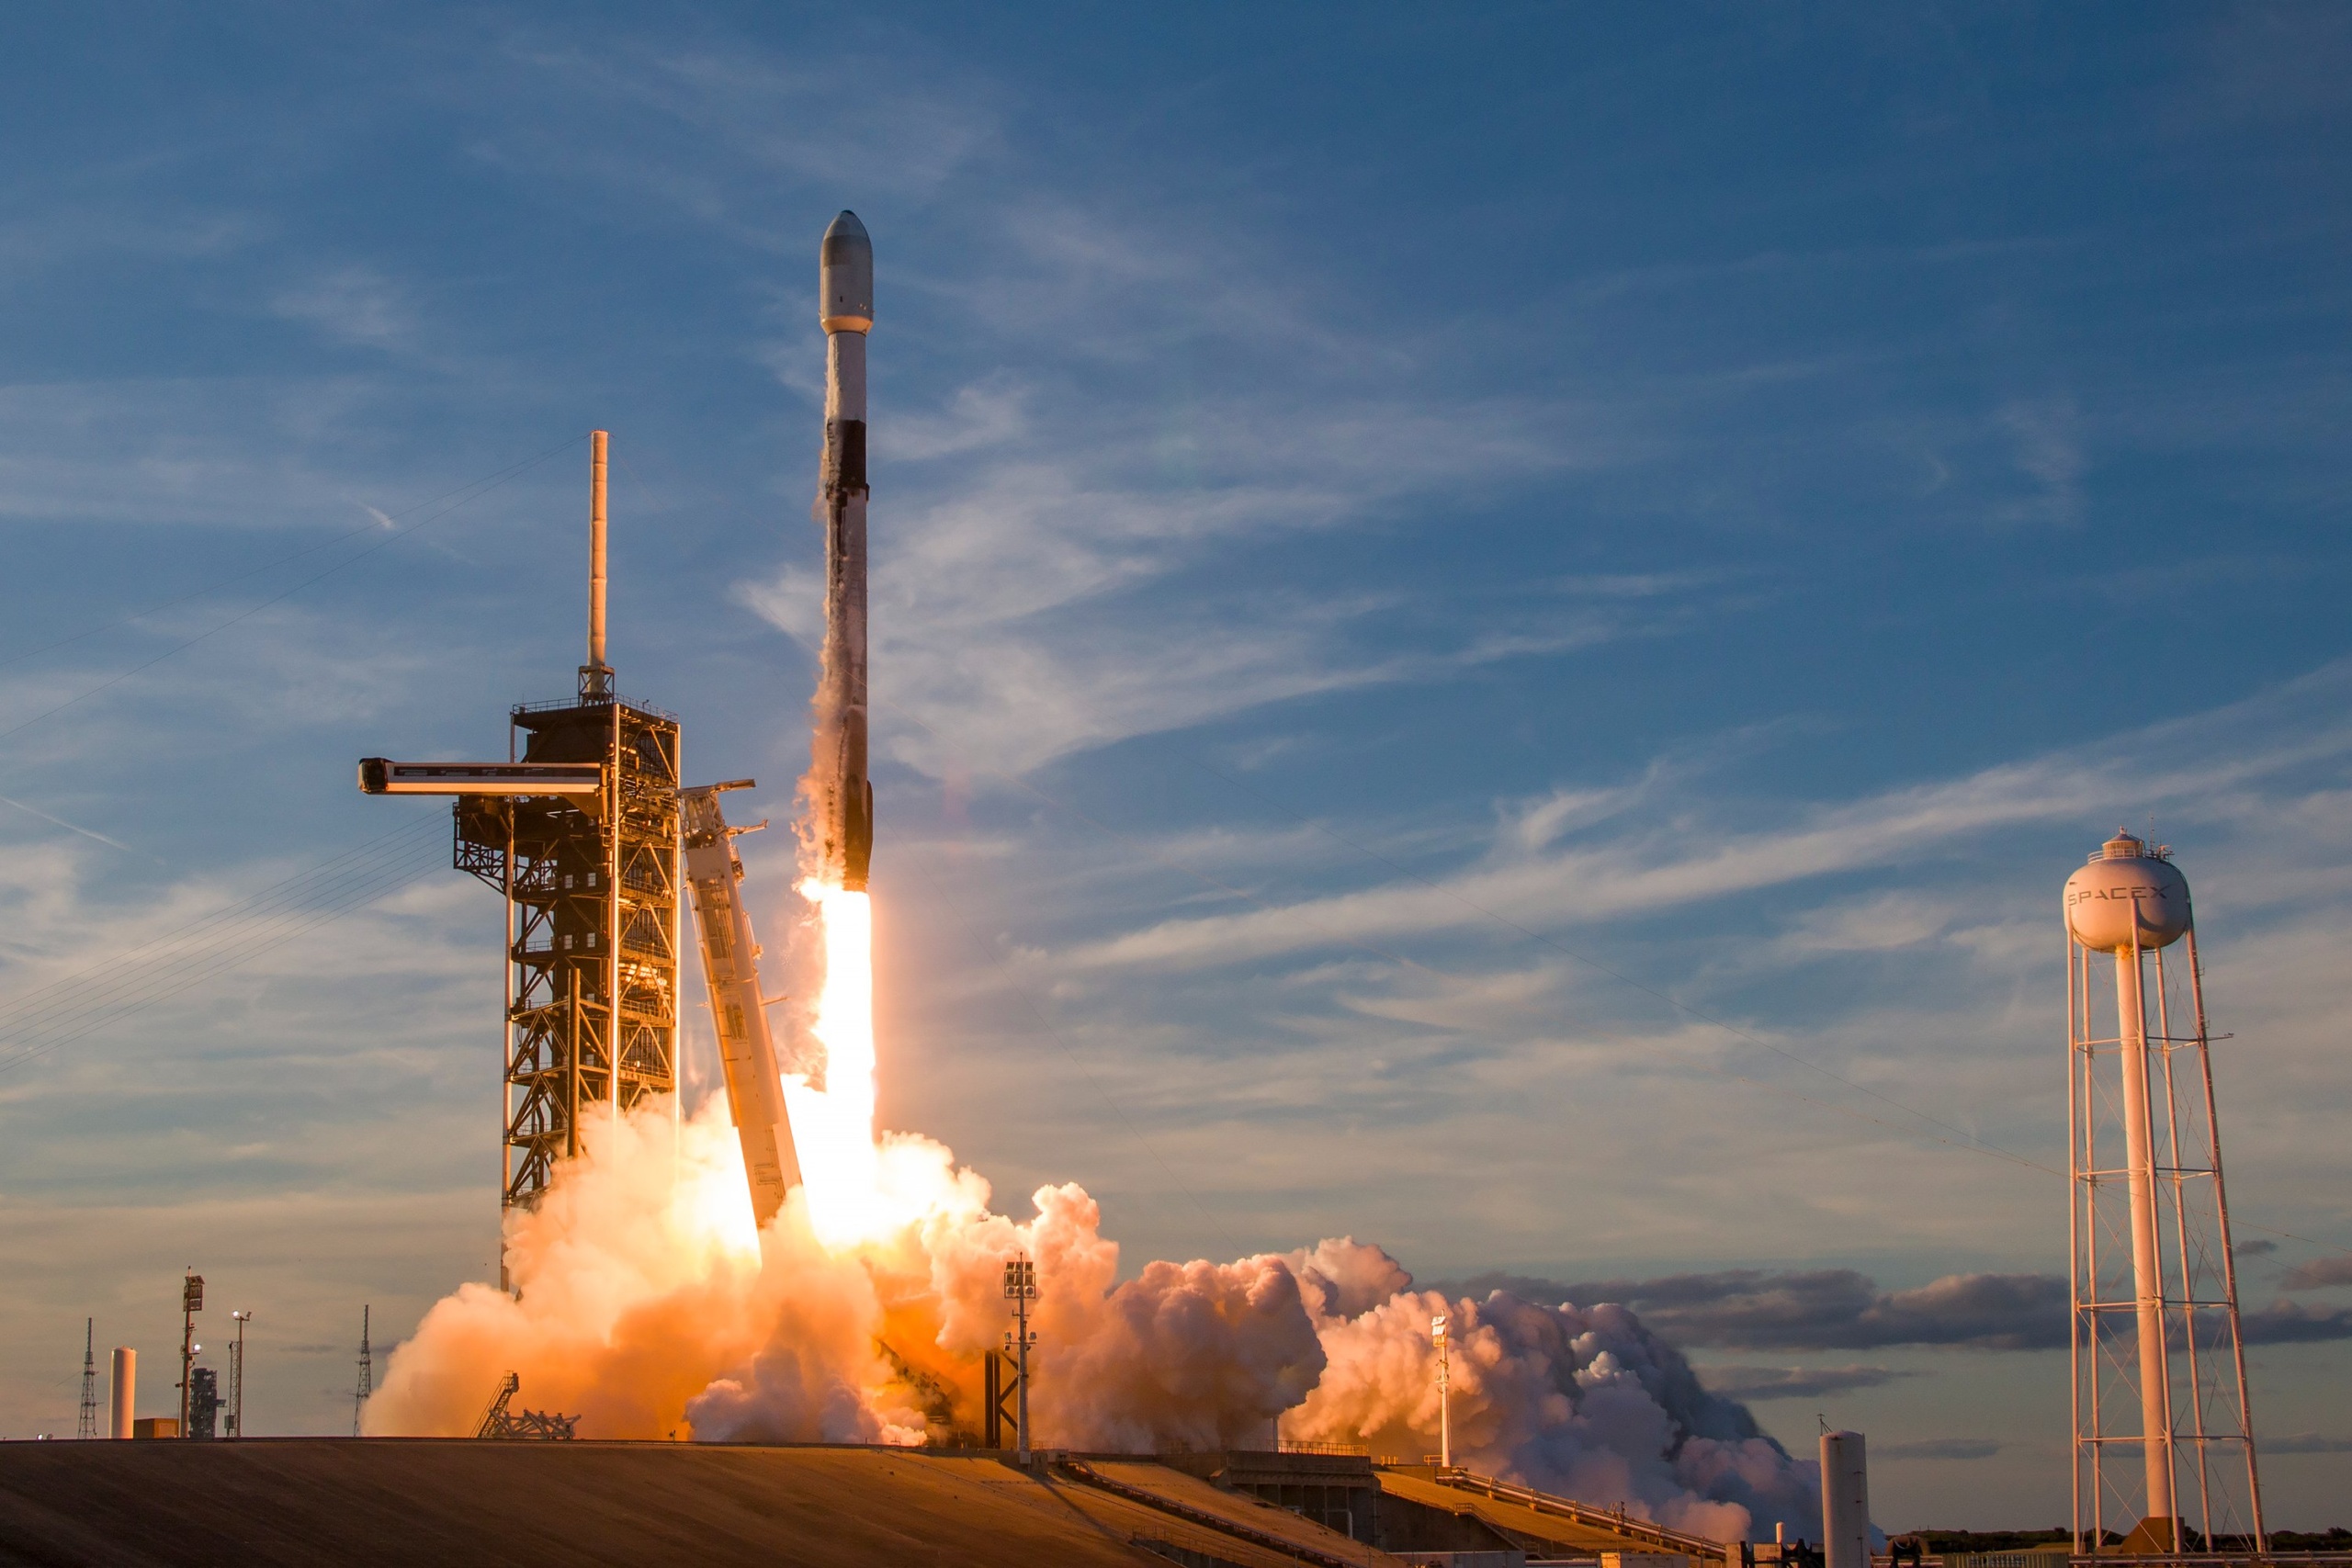 Payload in the $1.8 Trillion Space Economy